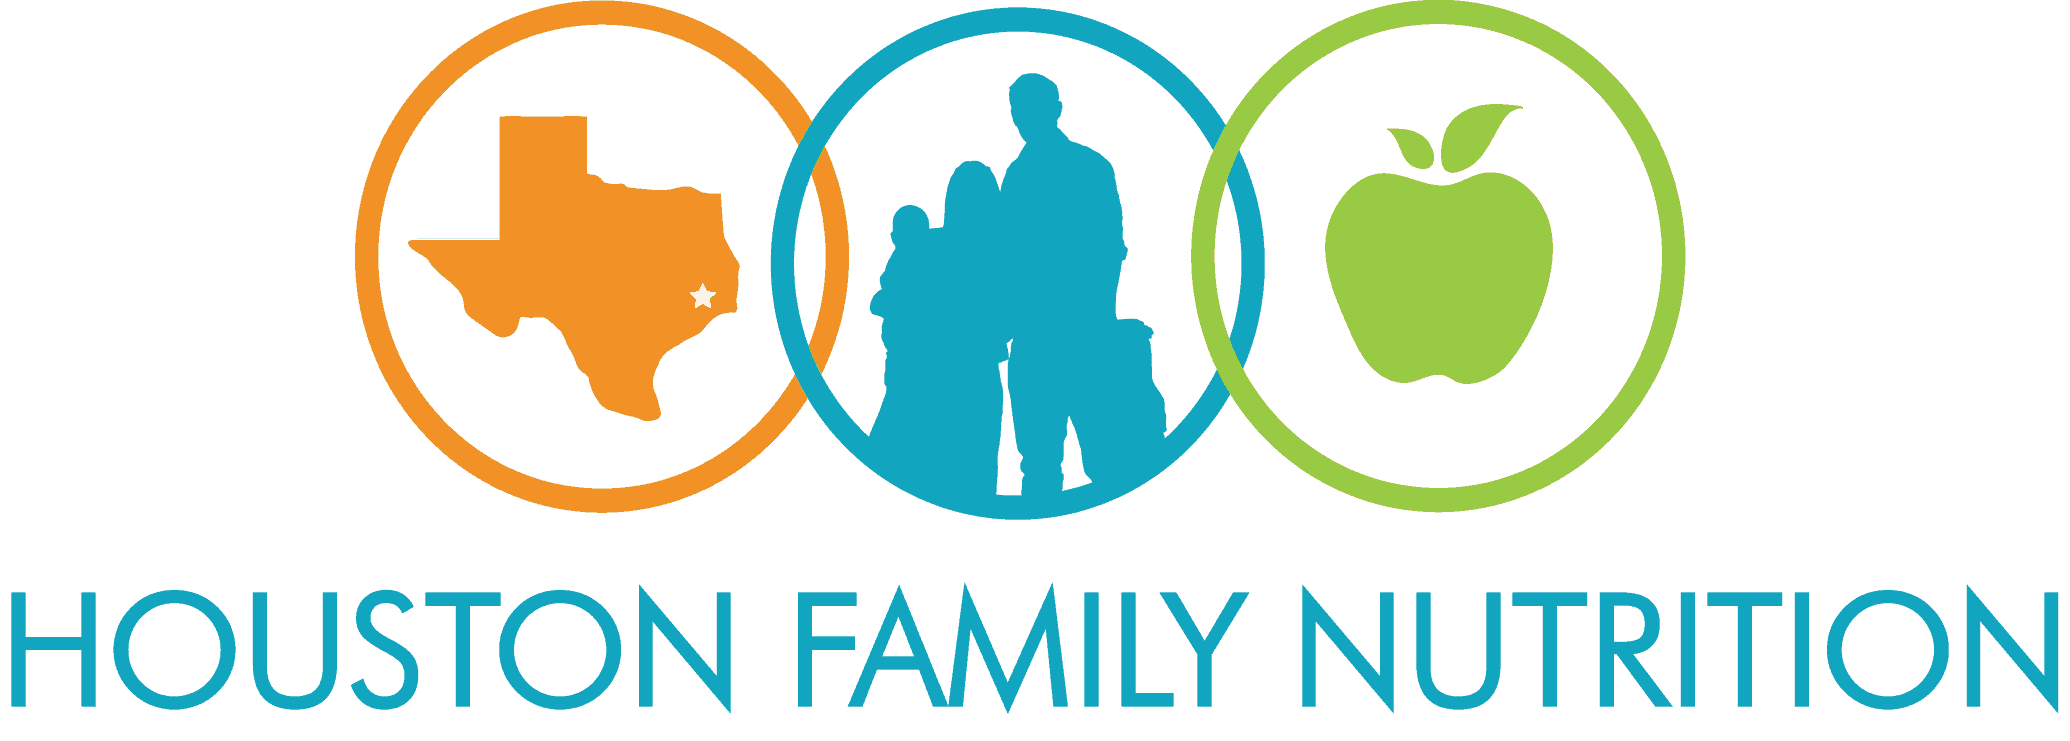 nutrition clipart family time